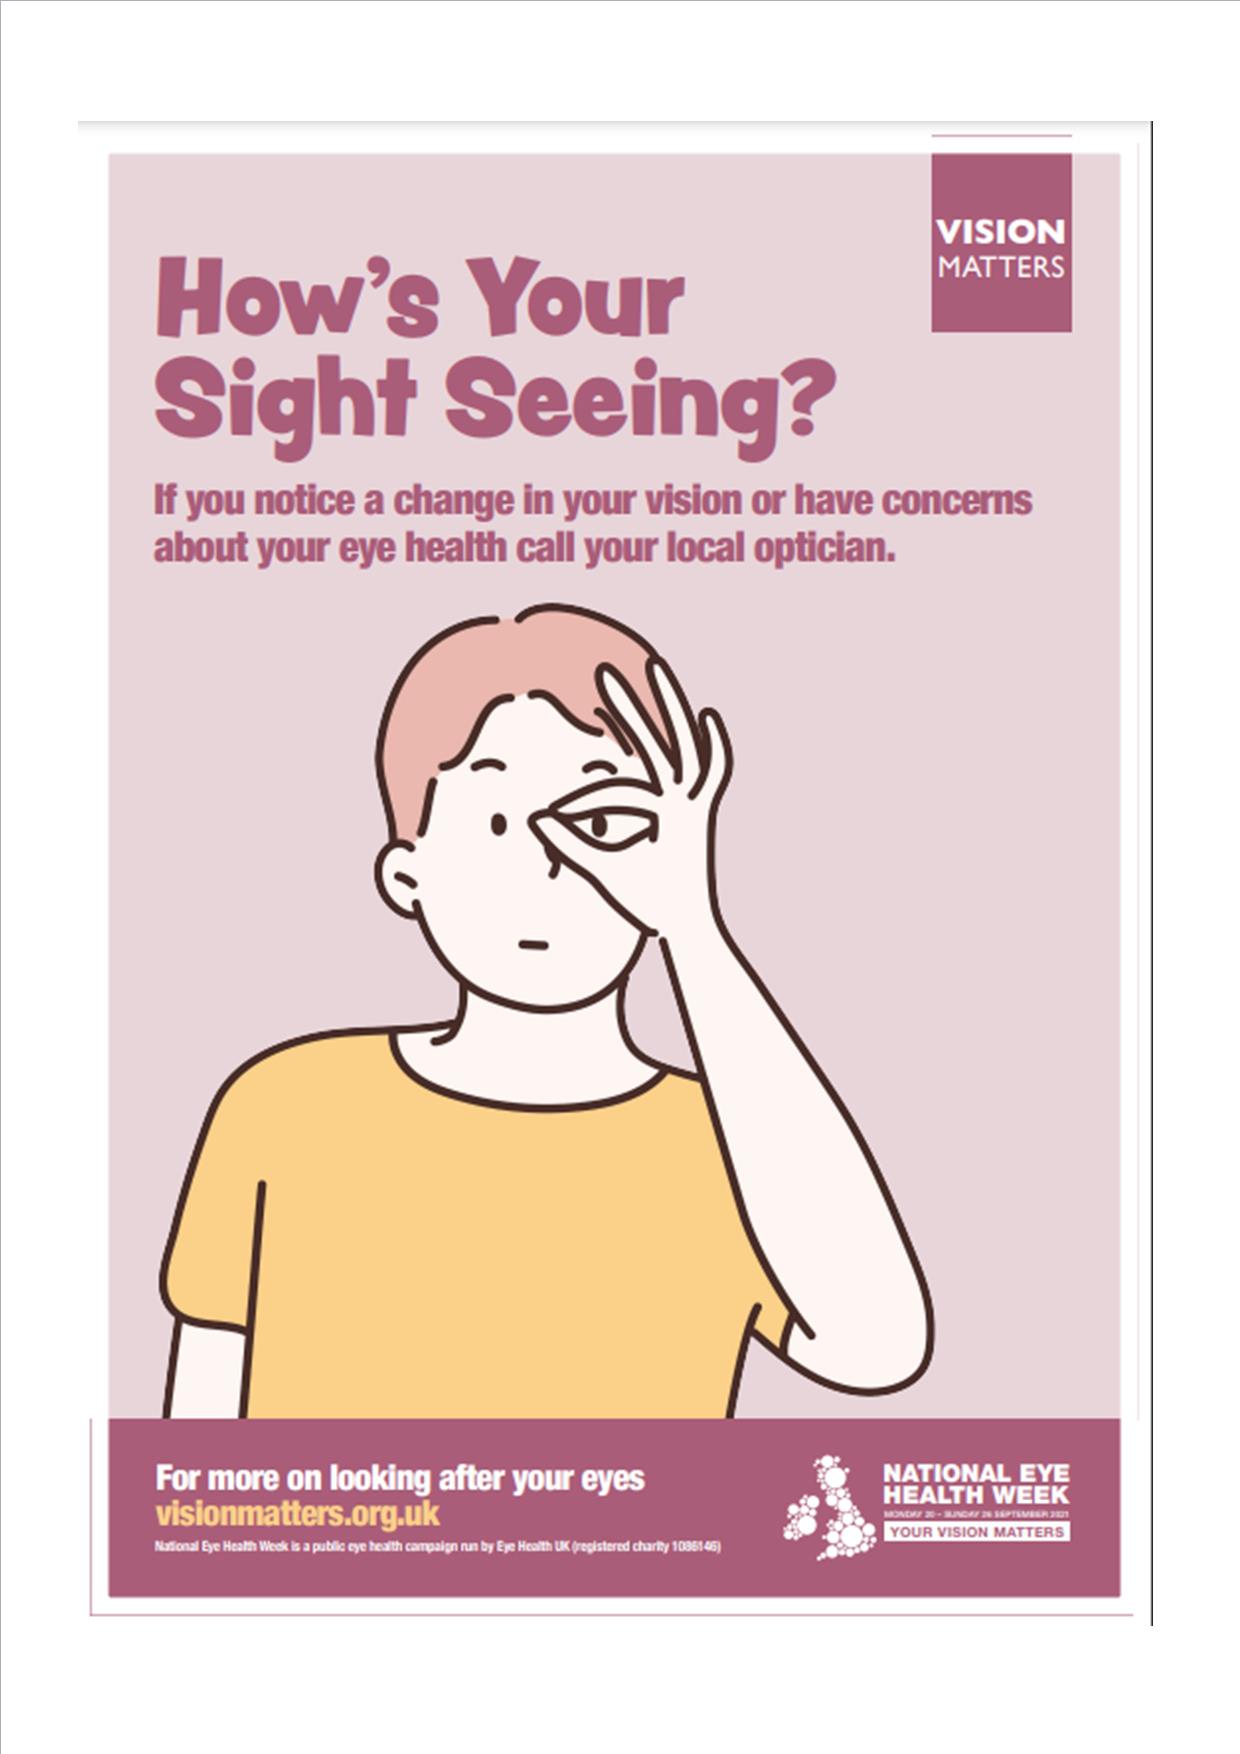 Dark pink text on a light pink background that reads "How's Your Sight Seeing? If you notice a change in your vision or have concerns about your eye health call your local optician. To the top right of the poster is a small dark pink square with the writing "Vision Matters" inside it in white. Below is an illustration of a person wearing a yellow short sleeved top with light brown hair holding their left hand in an ok hand gesture over their left eye. Below is a dark pink banner with white and yellow text that reads "For more on looking after your eyes visionmatters.org.uk National Eye Health Week is a public eye health campaign run by Eye Health UK (registered charity) on the right of the banner is the National Eye Health Week logo. 